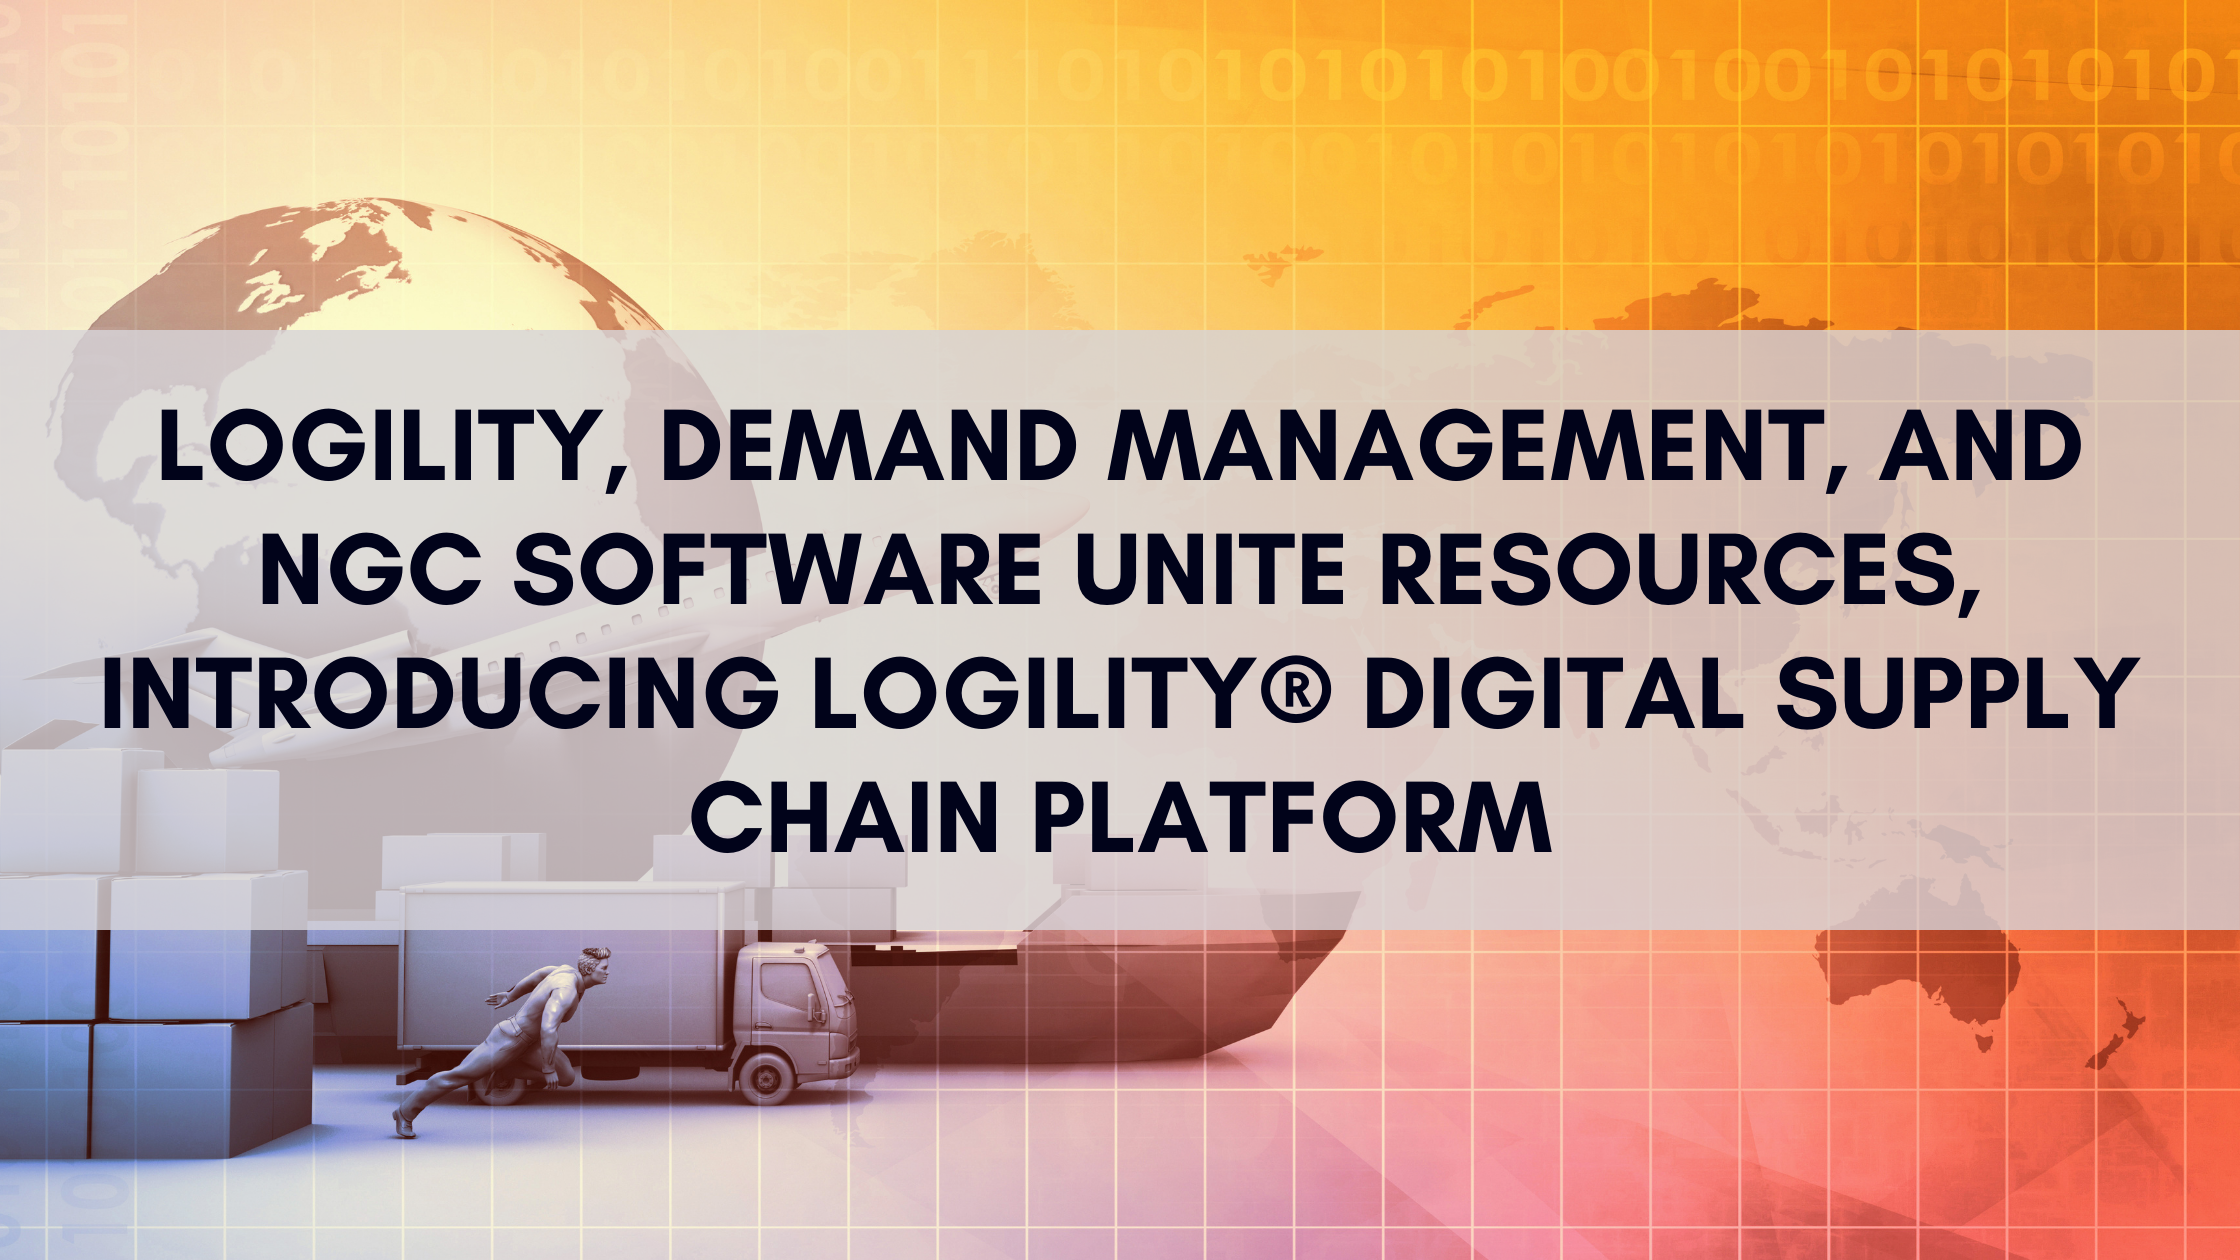 Logility, Demand Management, and NGC Software Unite Resources, Introducing Logility® Digital Supply Chain Platform